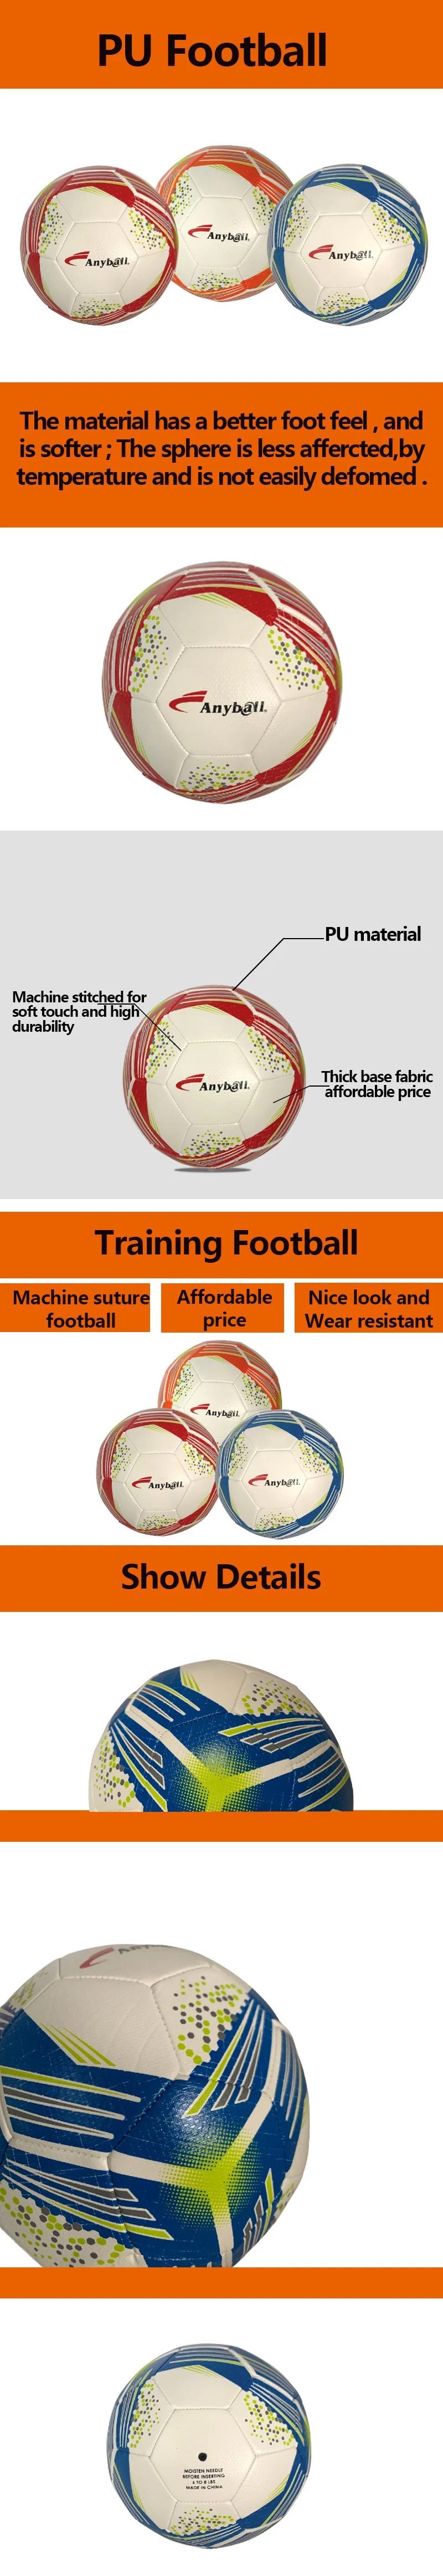 Wholesale Football Soccer Fine Material Favourable Price